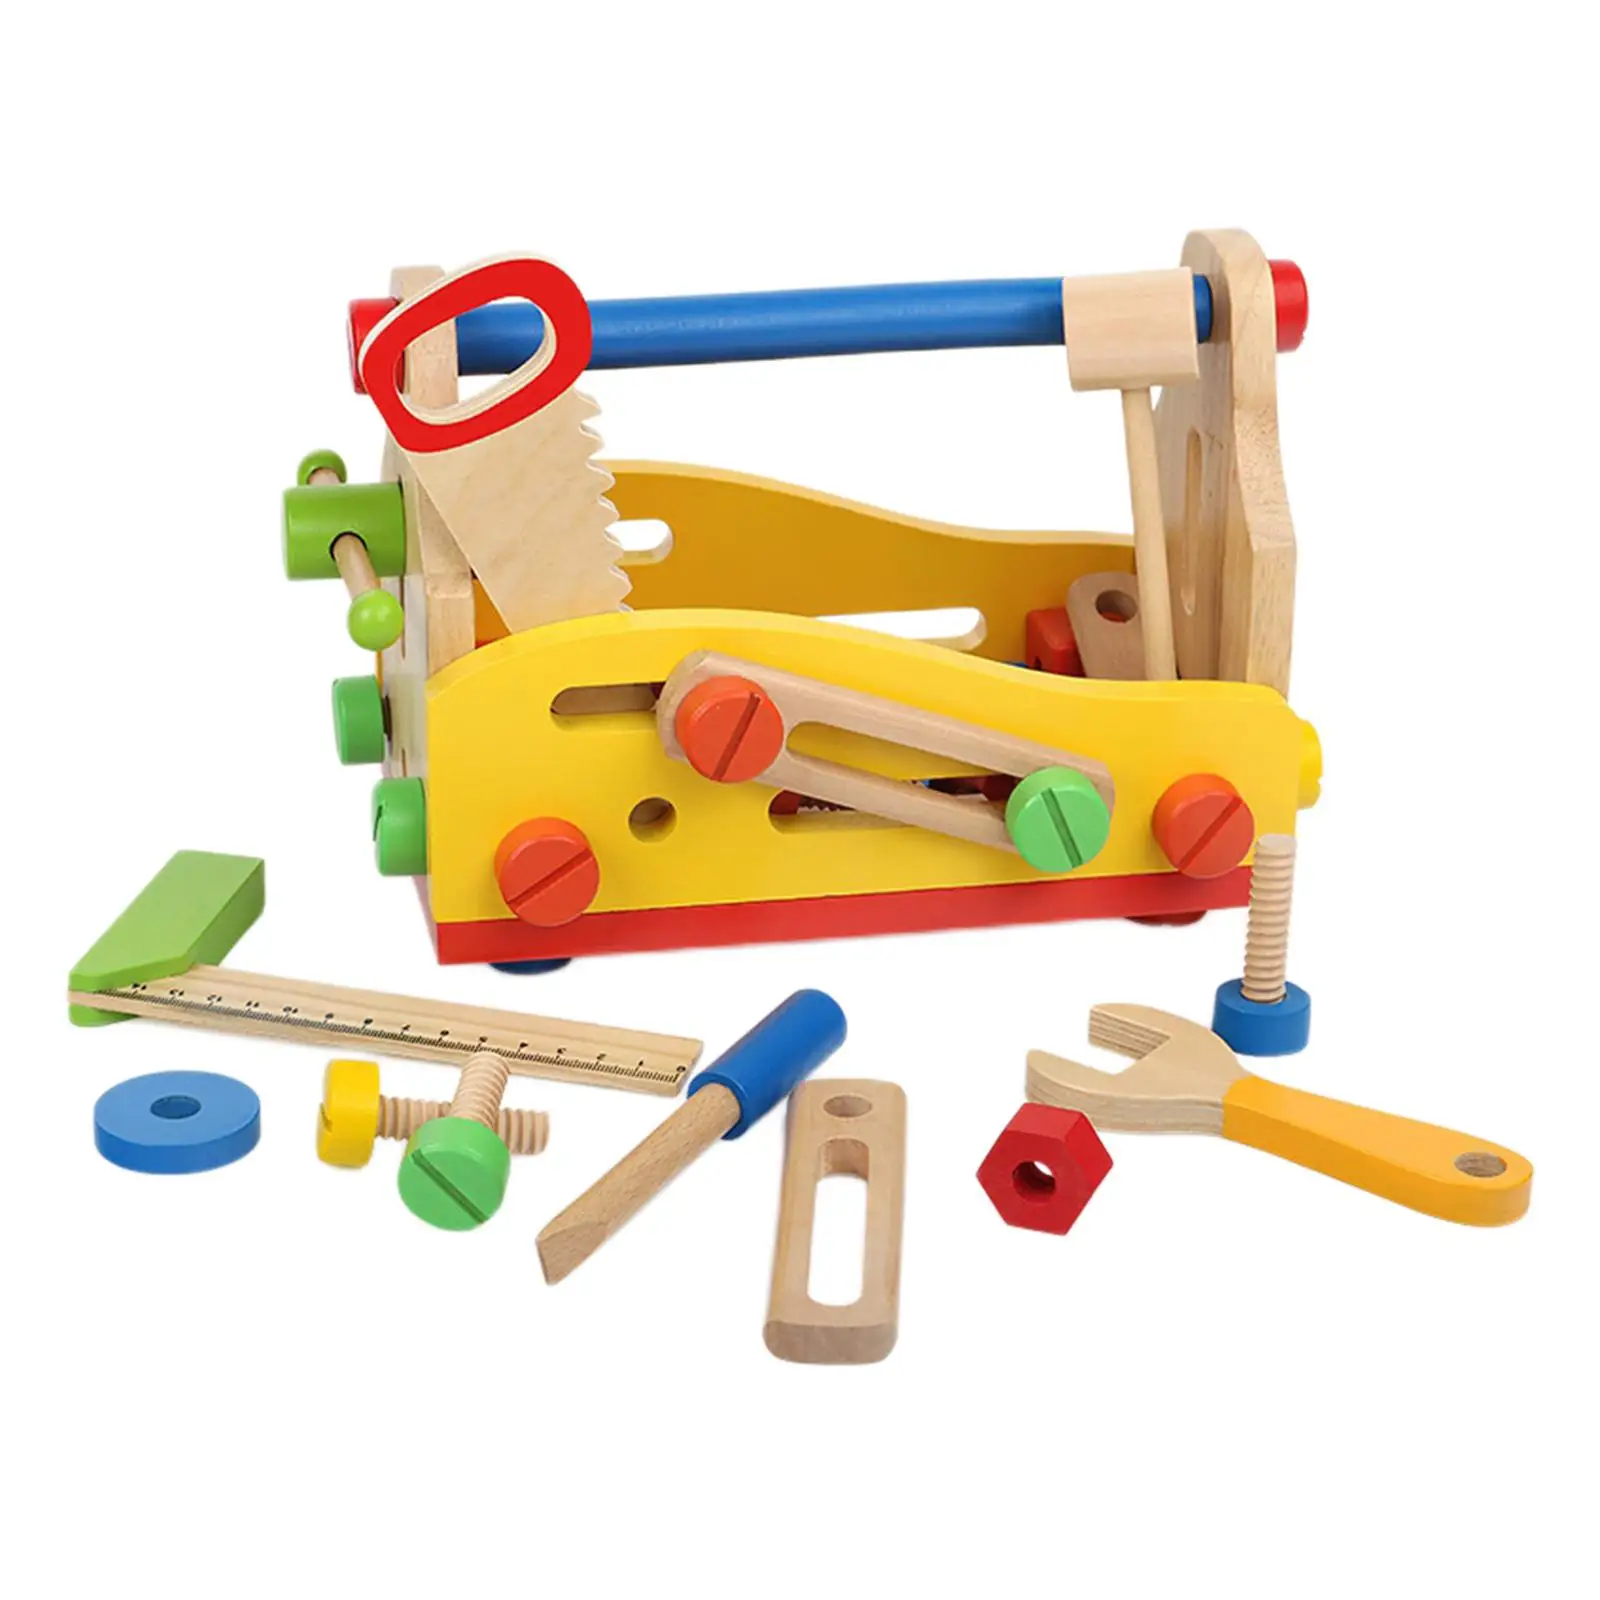 Montessori Wooden Tool Toy Preschool Learning Activities Play Tool Construction Toy for Kids Toddler Preschool